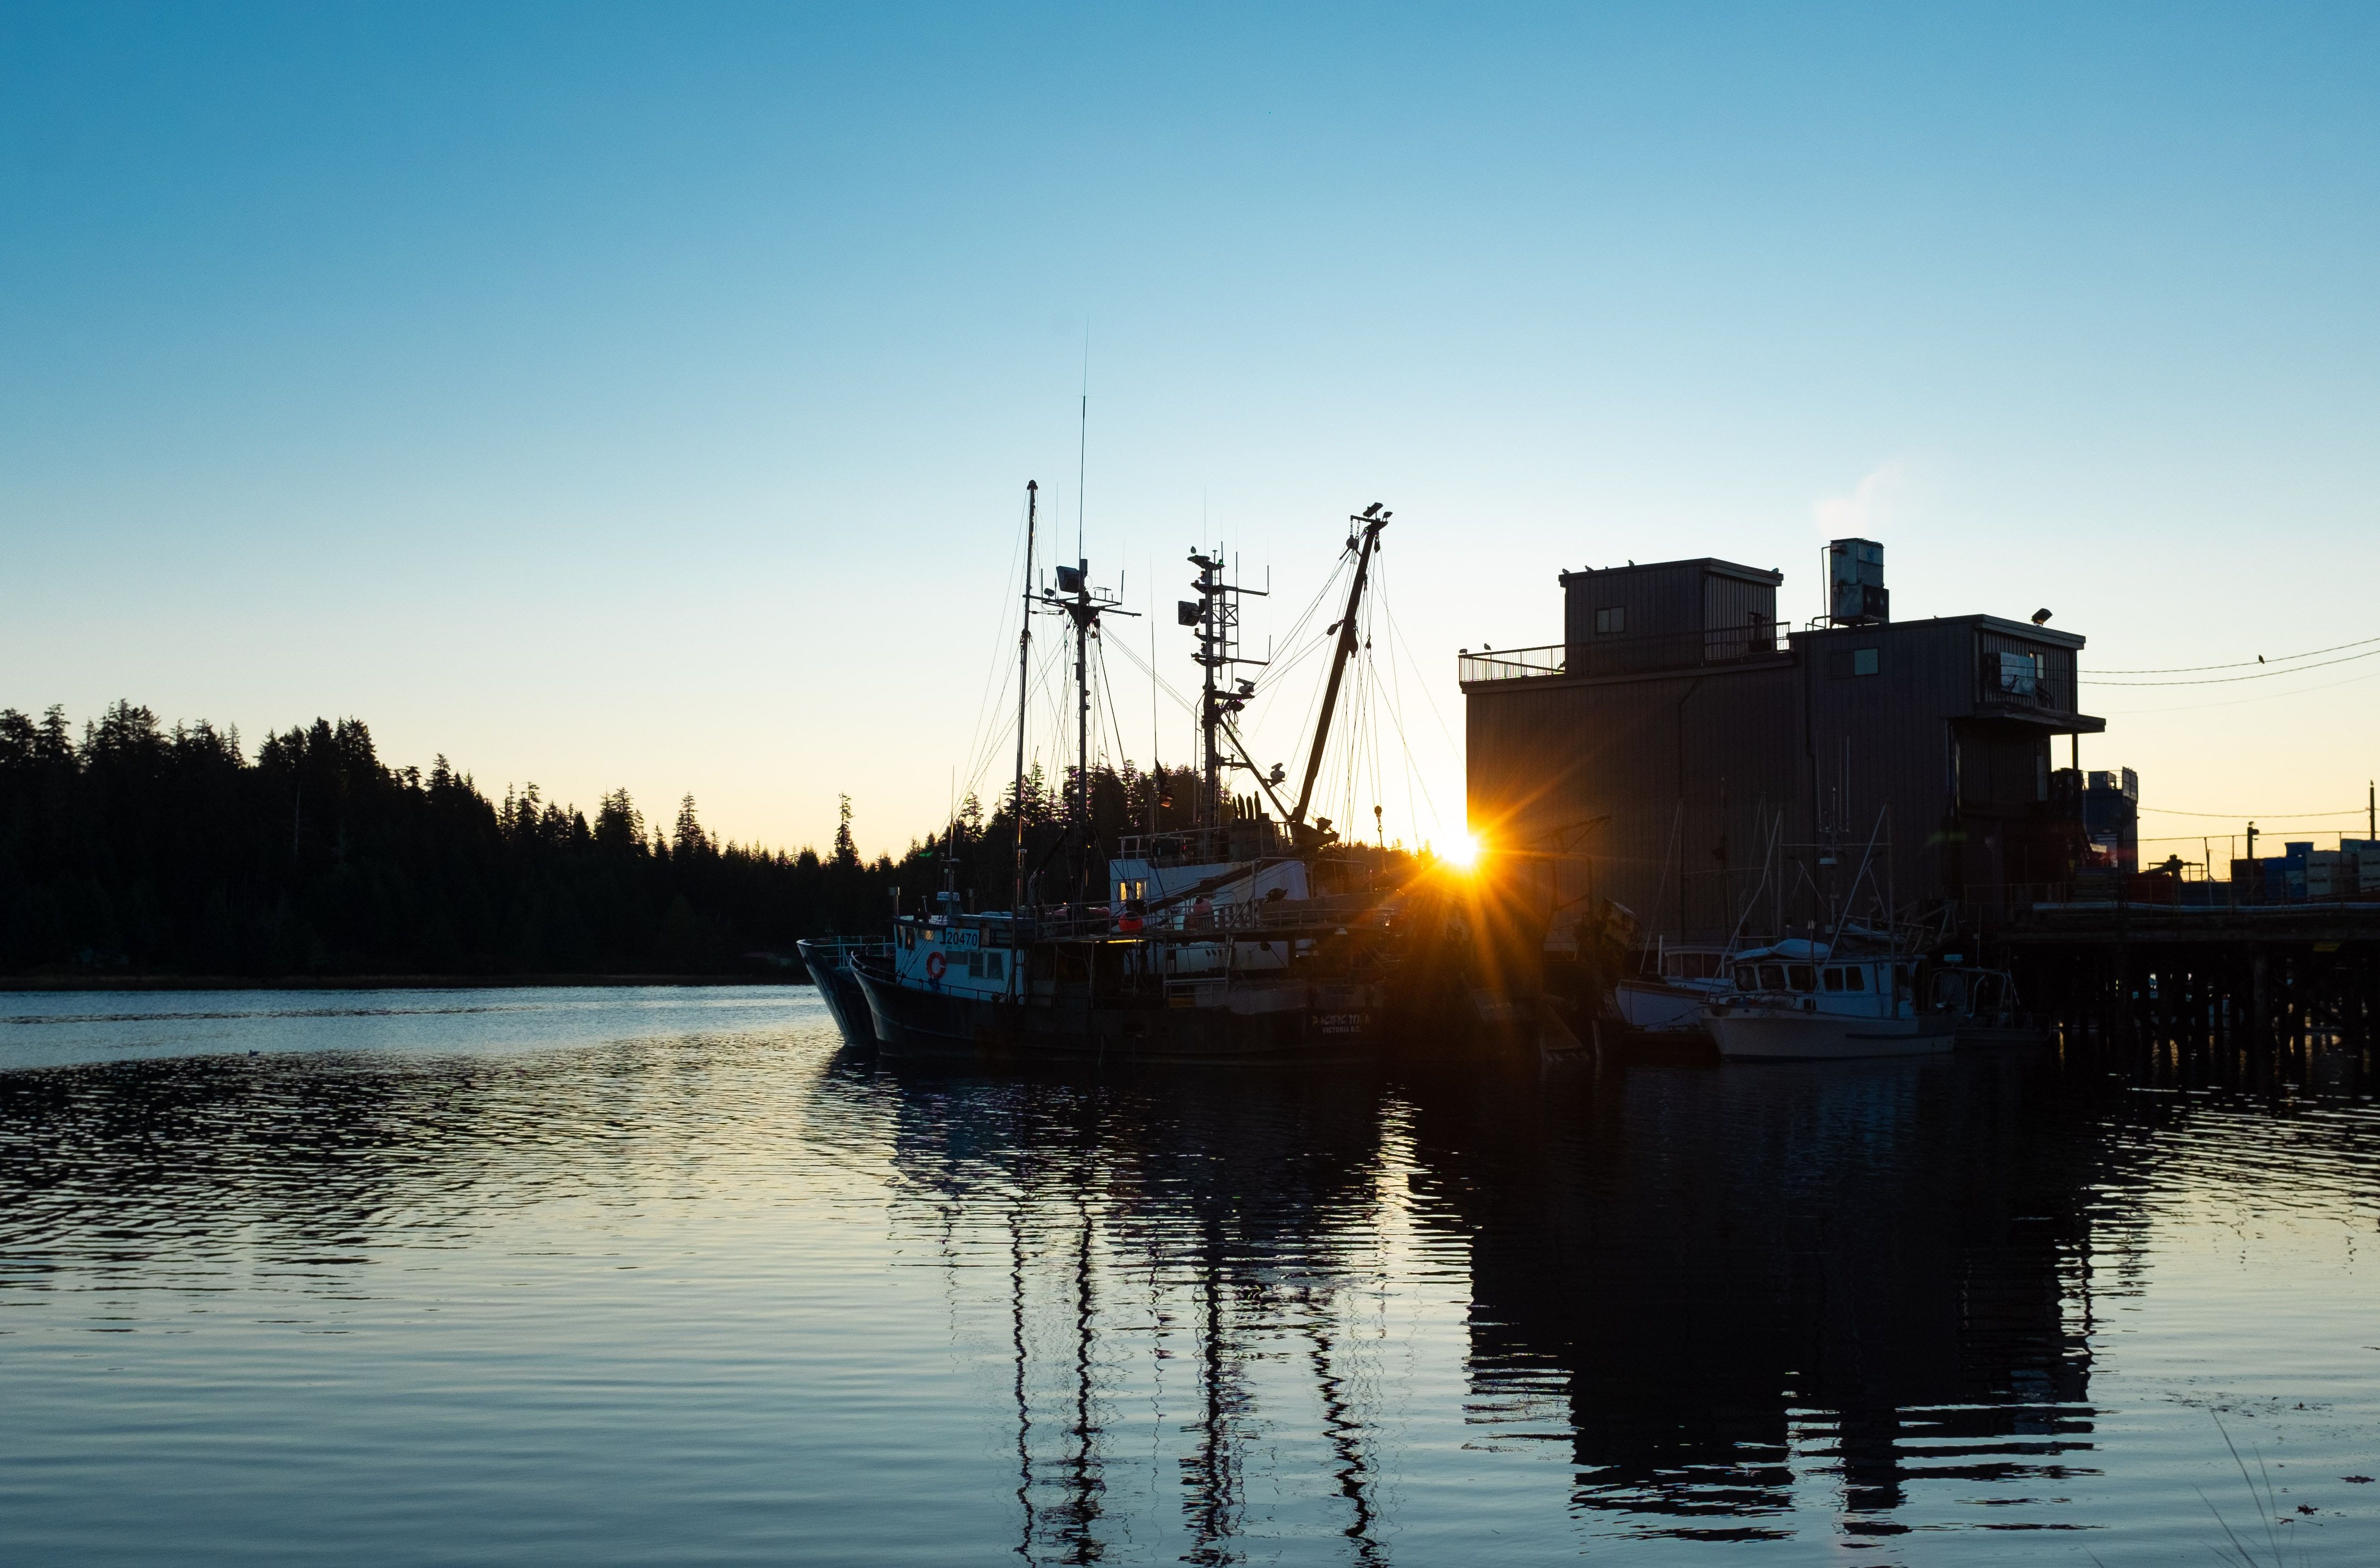 Boats on the water near a building in Ucluelet, Canada